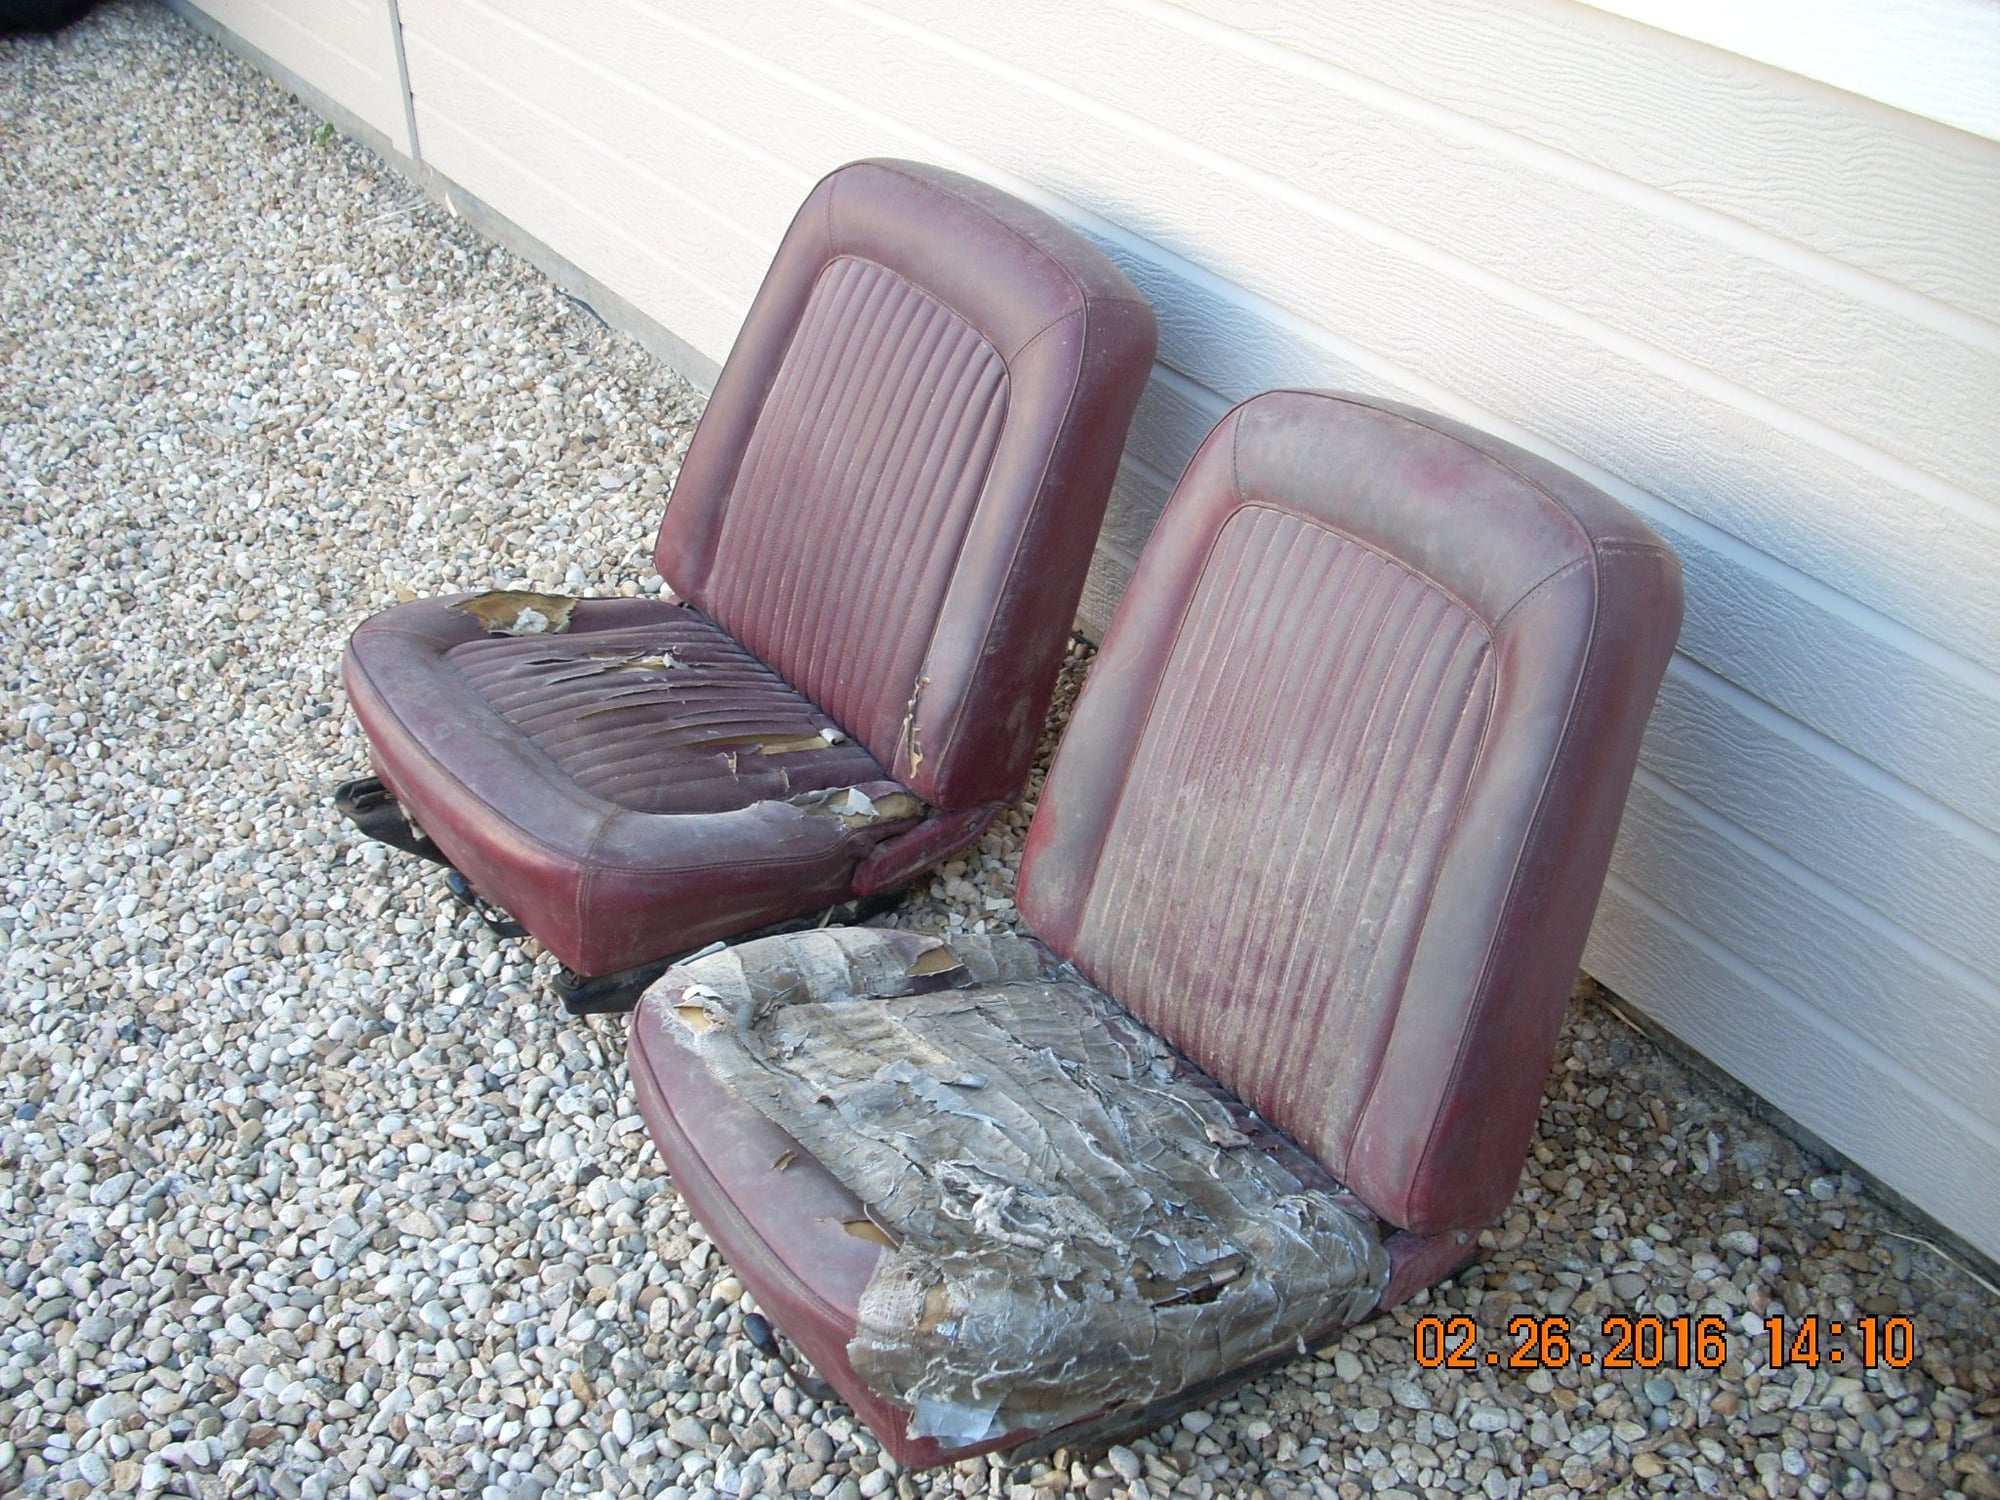 Interior/Upholstery - Bucket seats for 67-72 - Used - 1967 to 1972 Ford F-100 Ranger - Nampa, ID 83686, United States